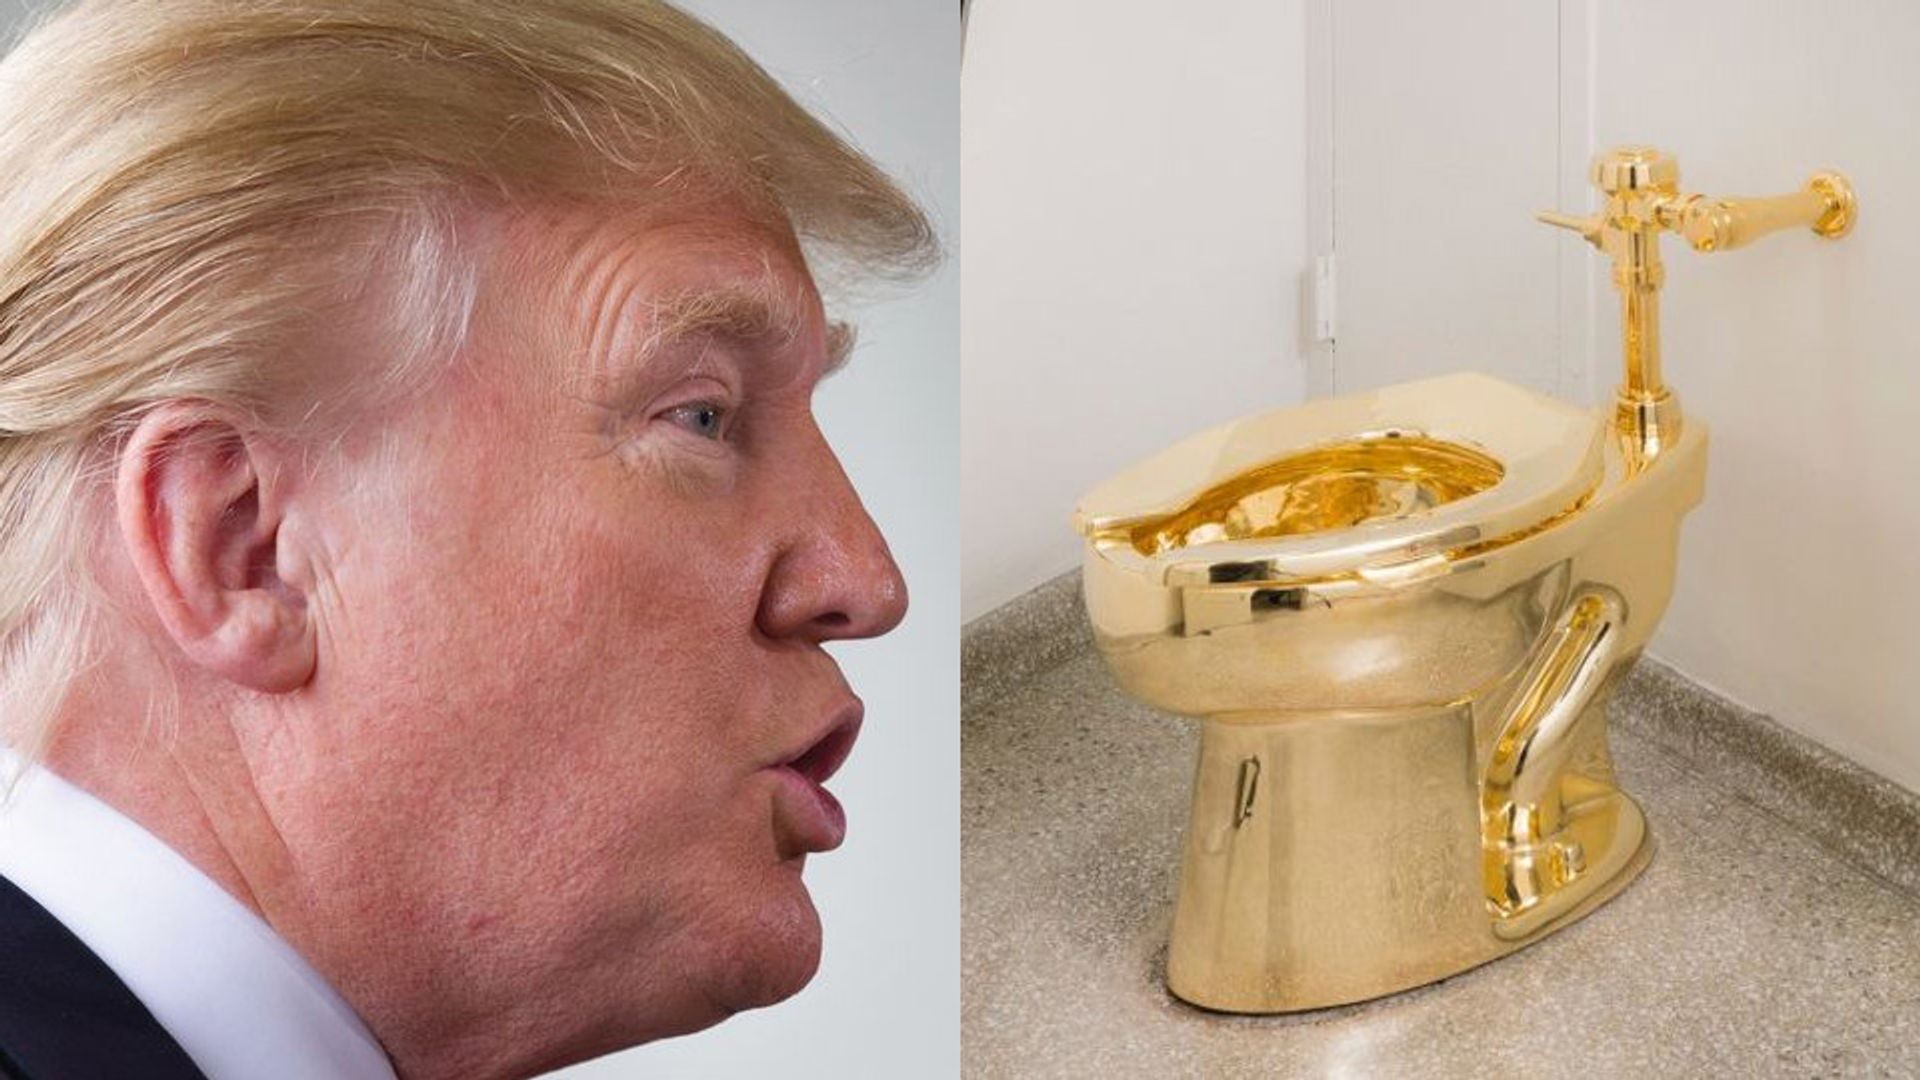 President Donald Trump was offered Maurizio Cattelan’s gold toilet instead of a Van Gogh painting Trump: Matthew Cavanaugh/Getty Images. Toilet: Photo: Kristopher McKay